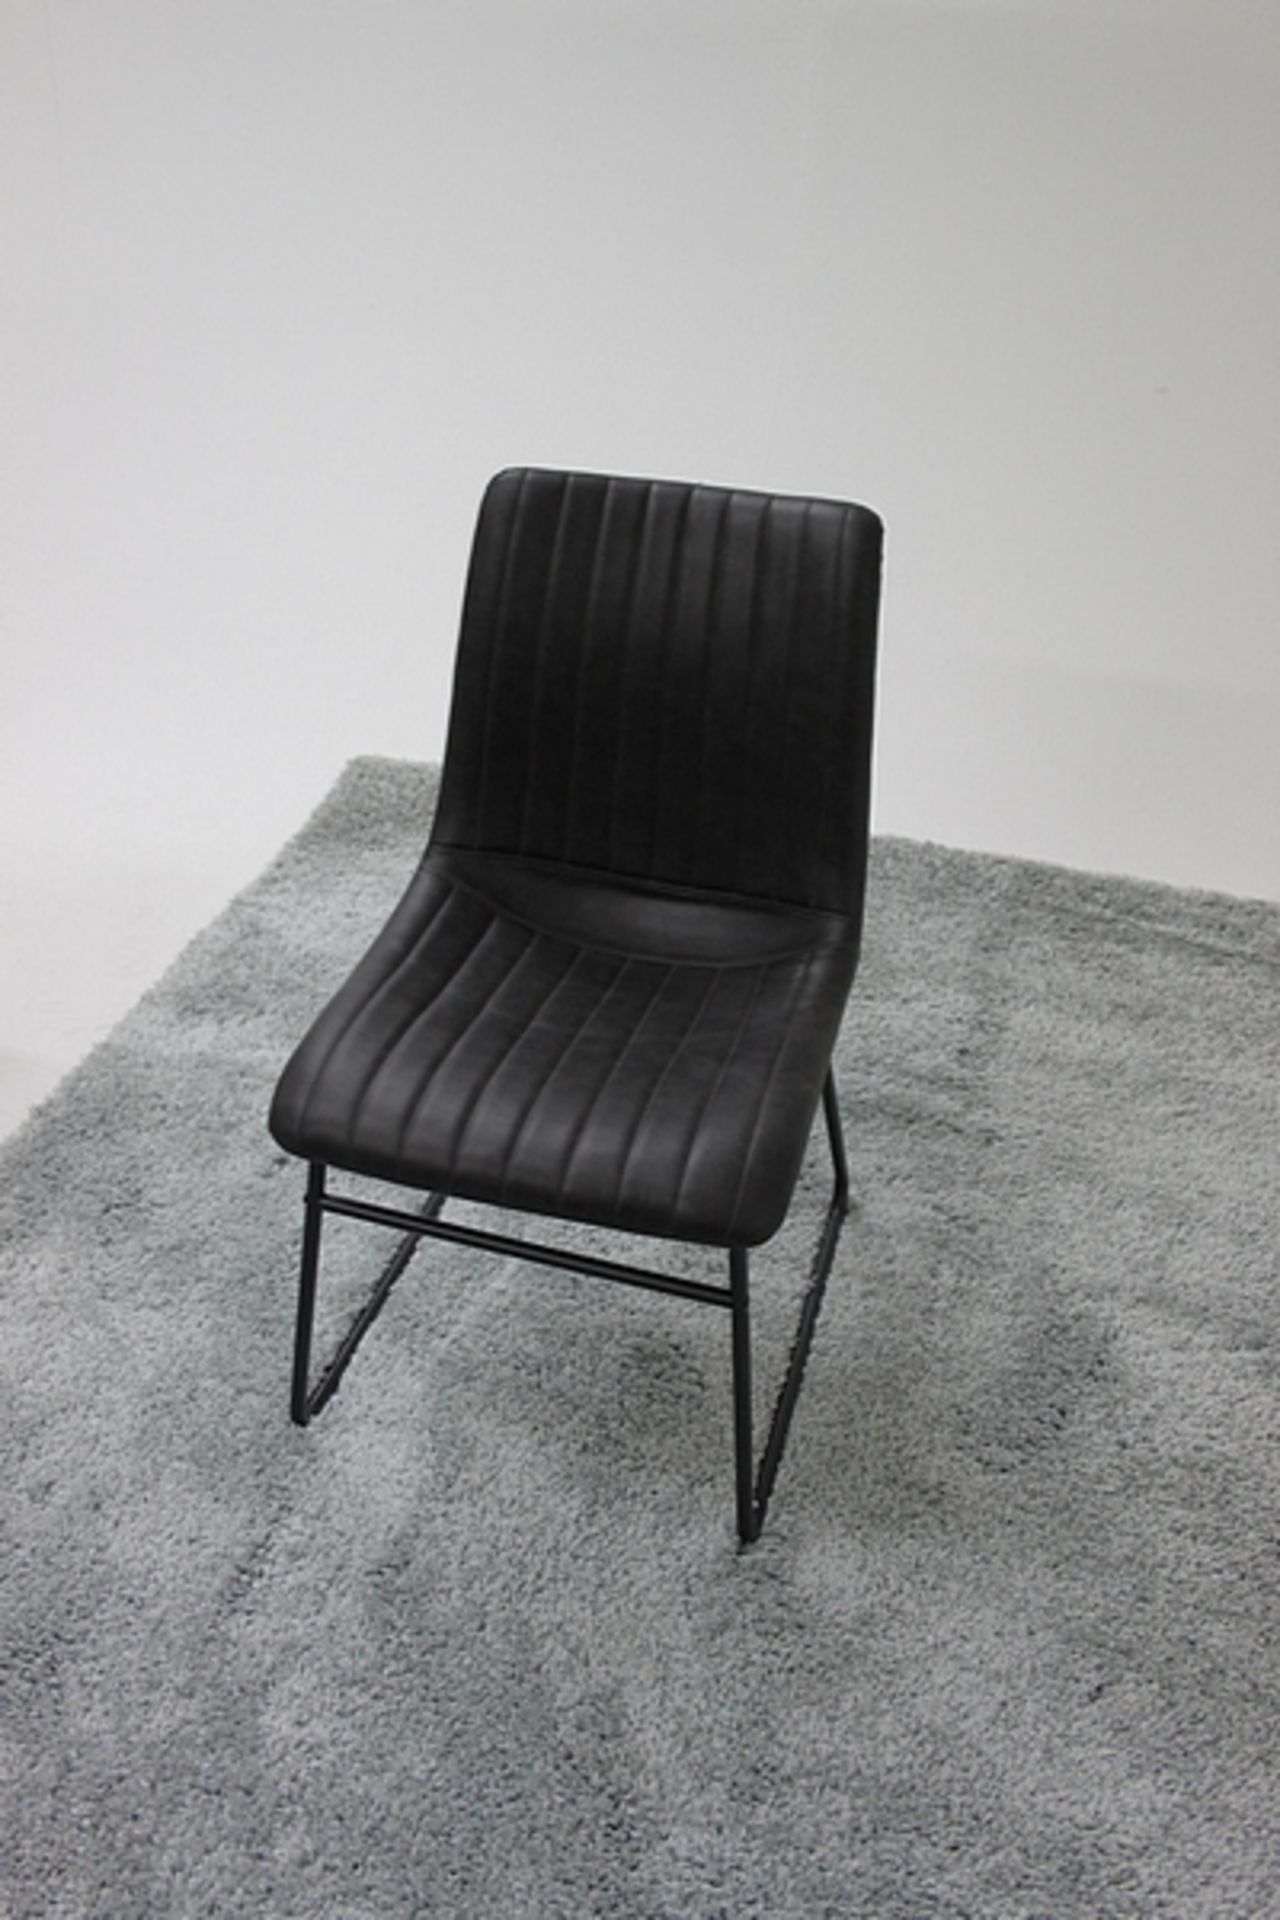 Caser Dining Chair Vegan Leather - Image 2 of 2